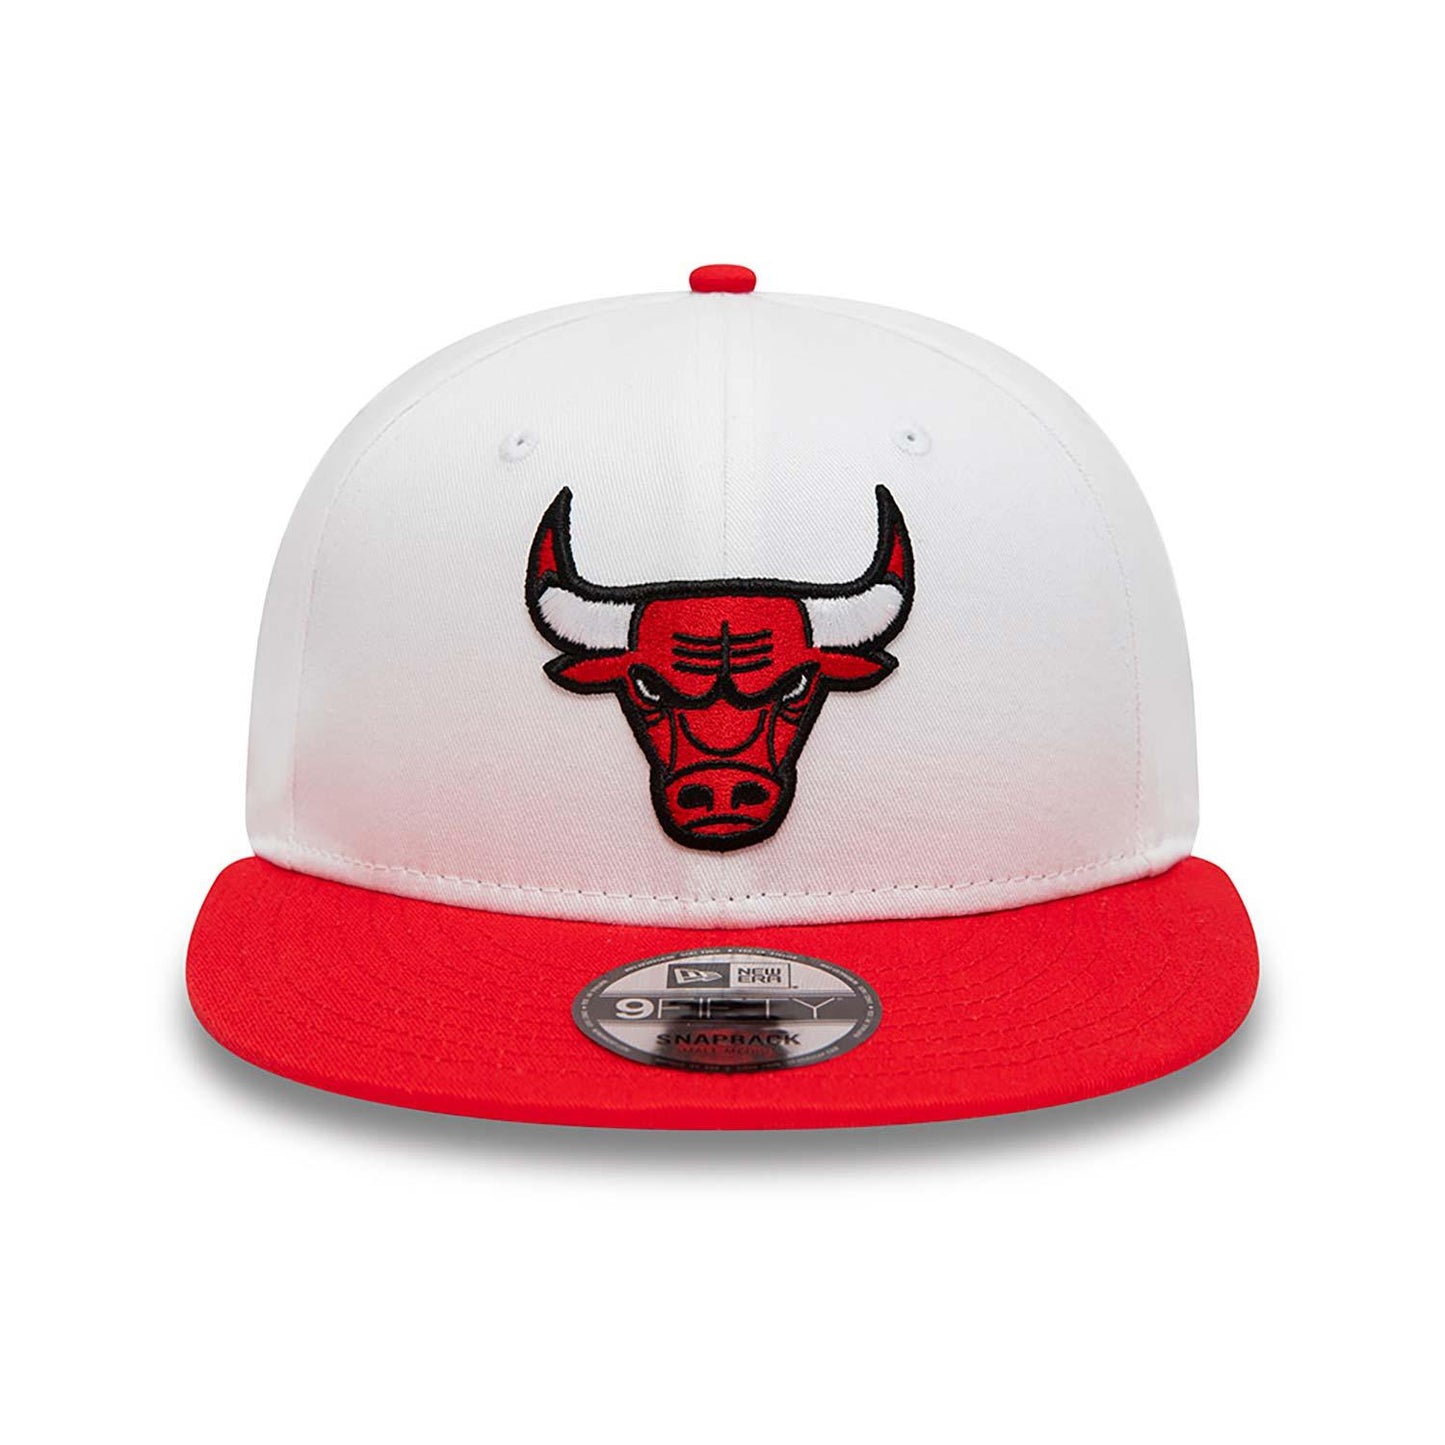 NEW ERA 9FIFTY WHITE CROWN PATCHES CHICAGO BULLS TWO TONE SNAPBACK